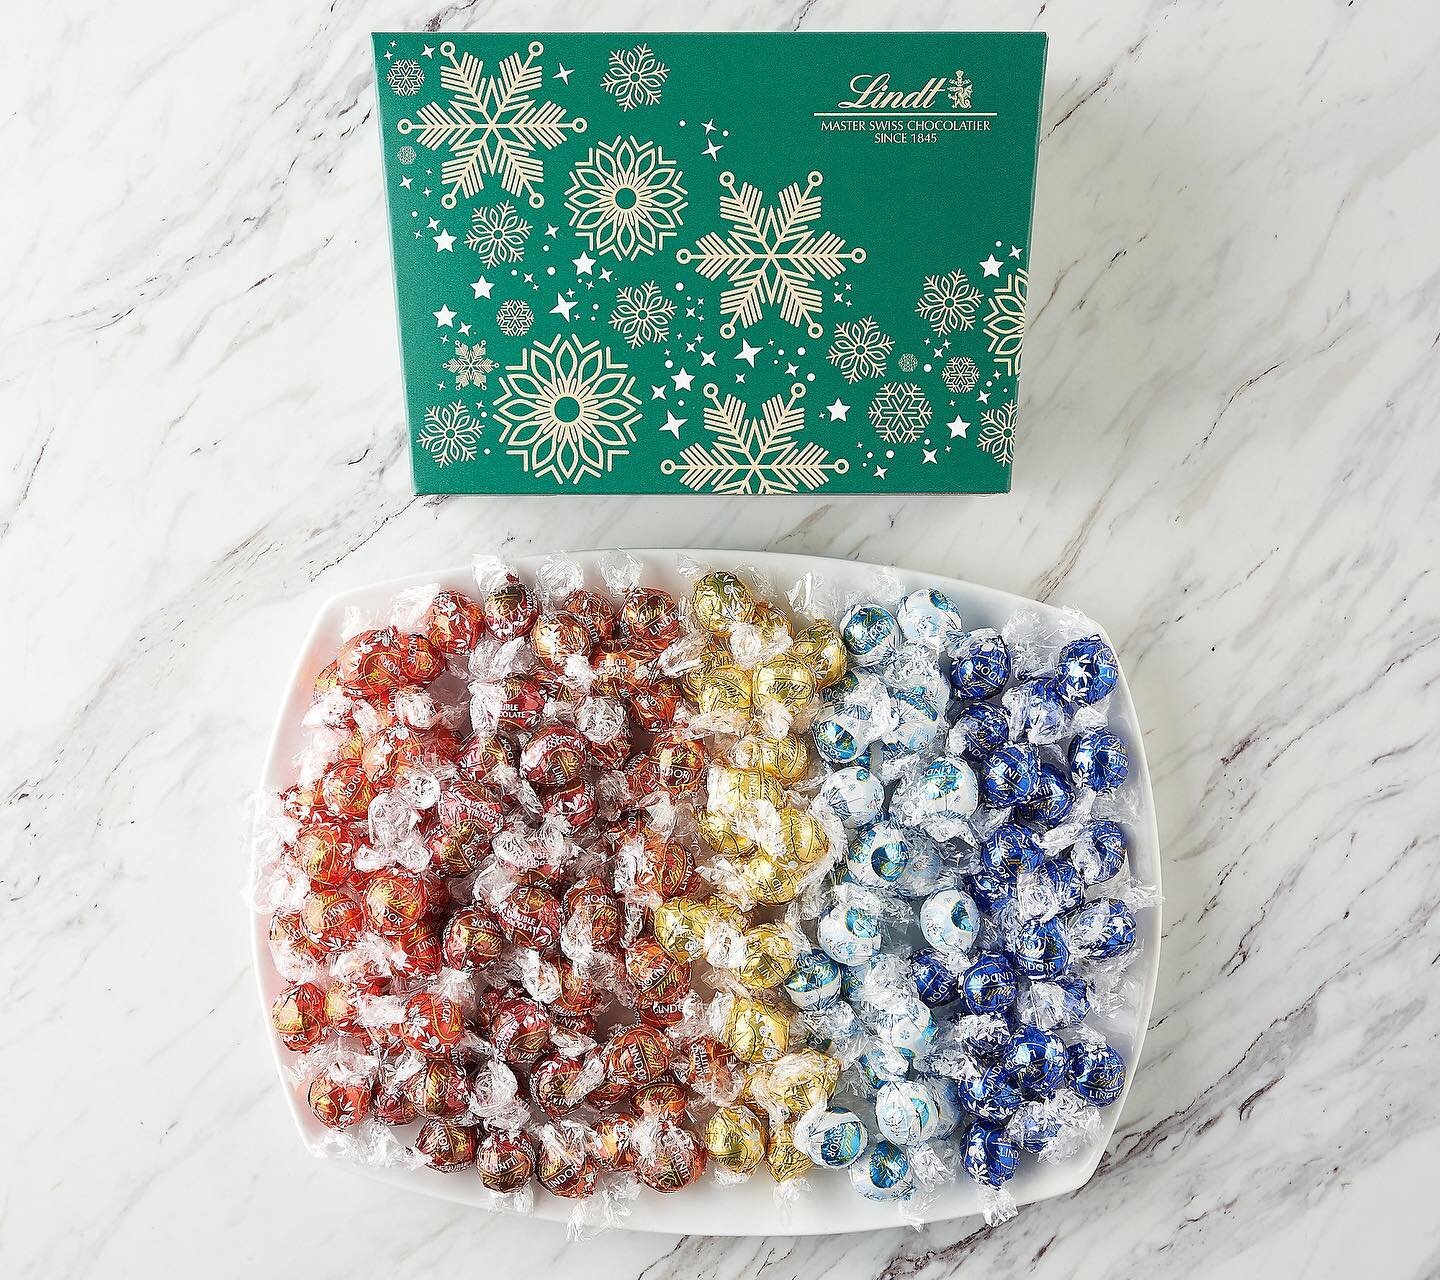 Always fun to see designs come to life 🤗 - especially when featured on TV! 

These boxes were designed exclusively for Lindt Chocolate to be featured on QVC - Christmas in July special ❄️🎁

#tistheseason #christmasinjuly #lindtchocolate #packagingd